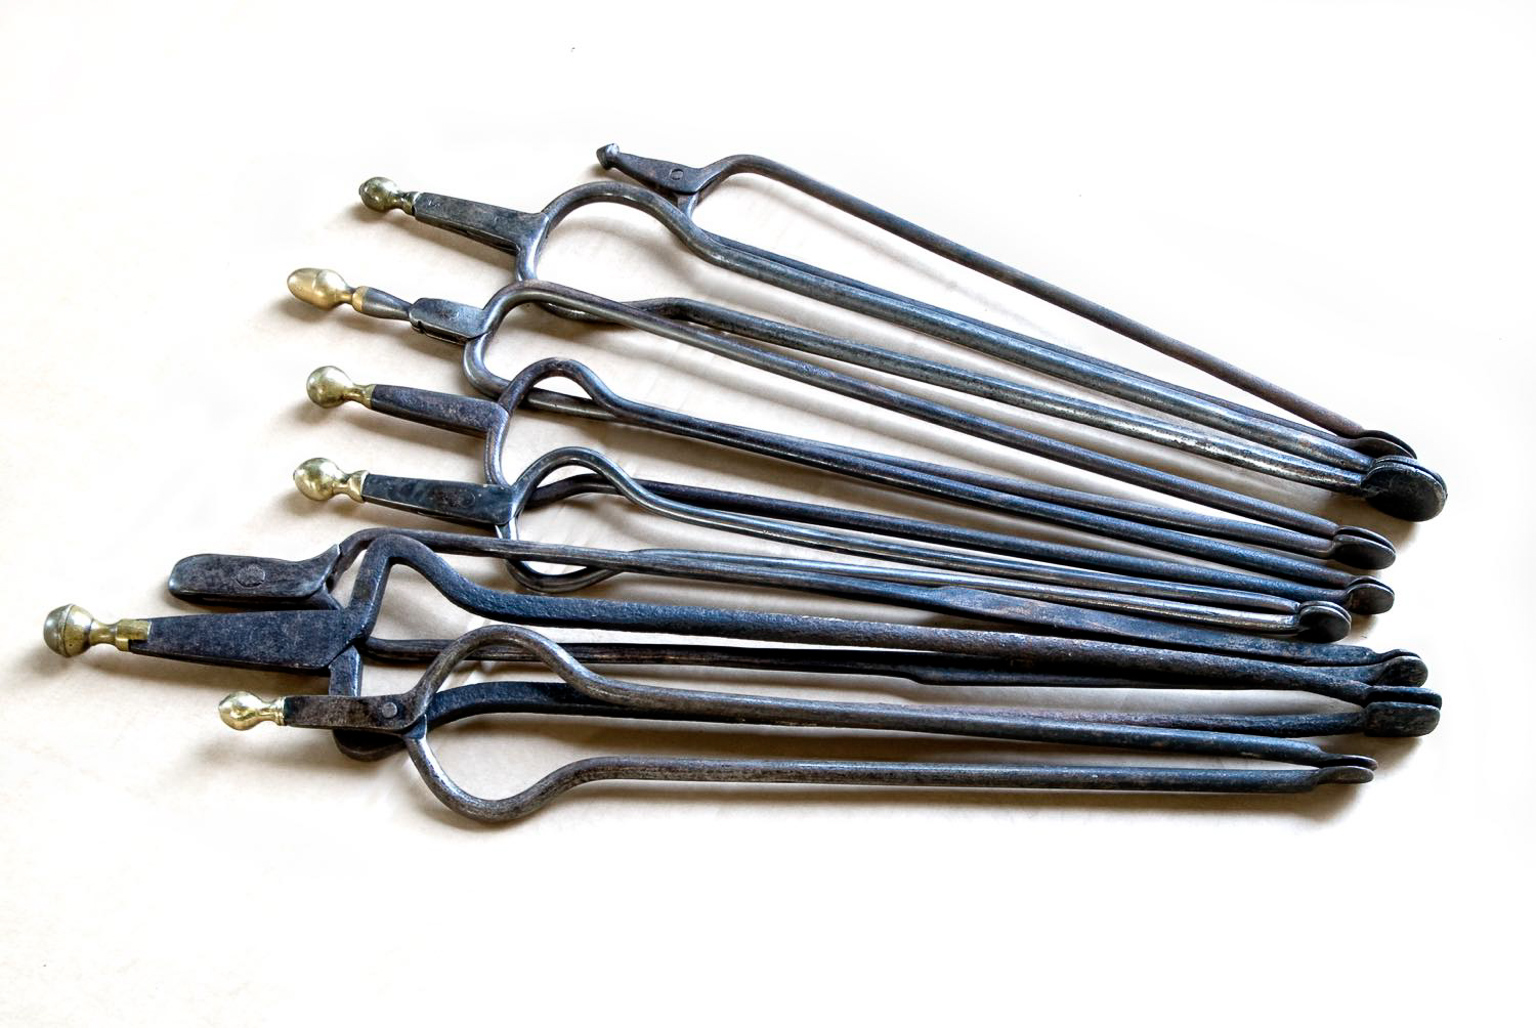 Our online collection of Dutch antique fireplace tongs